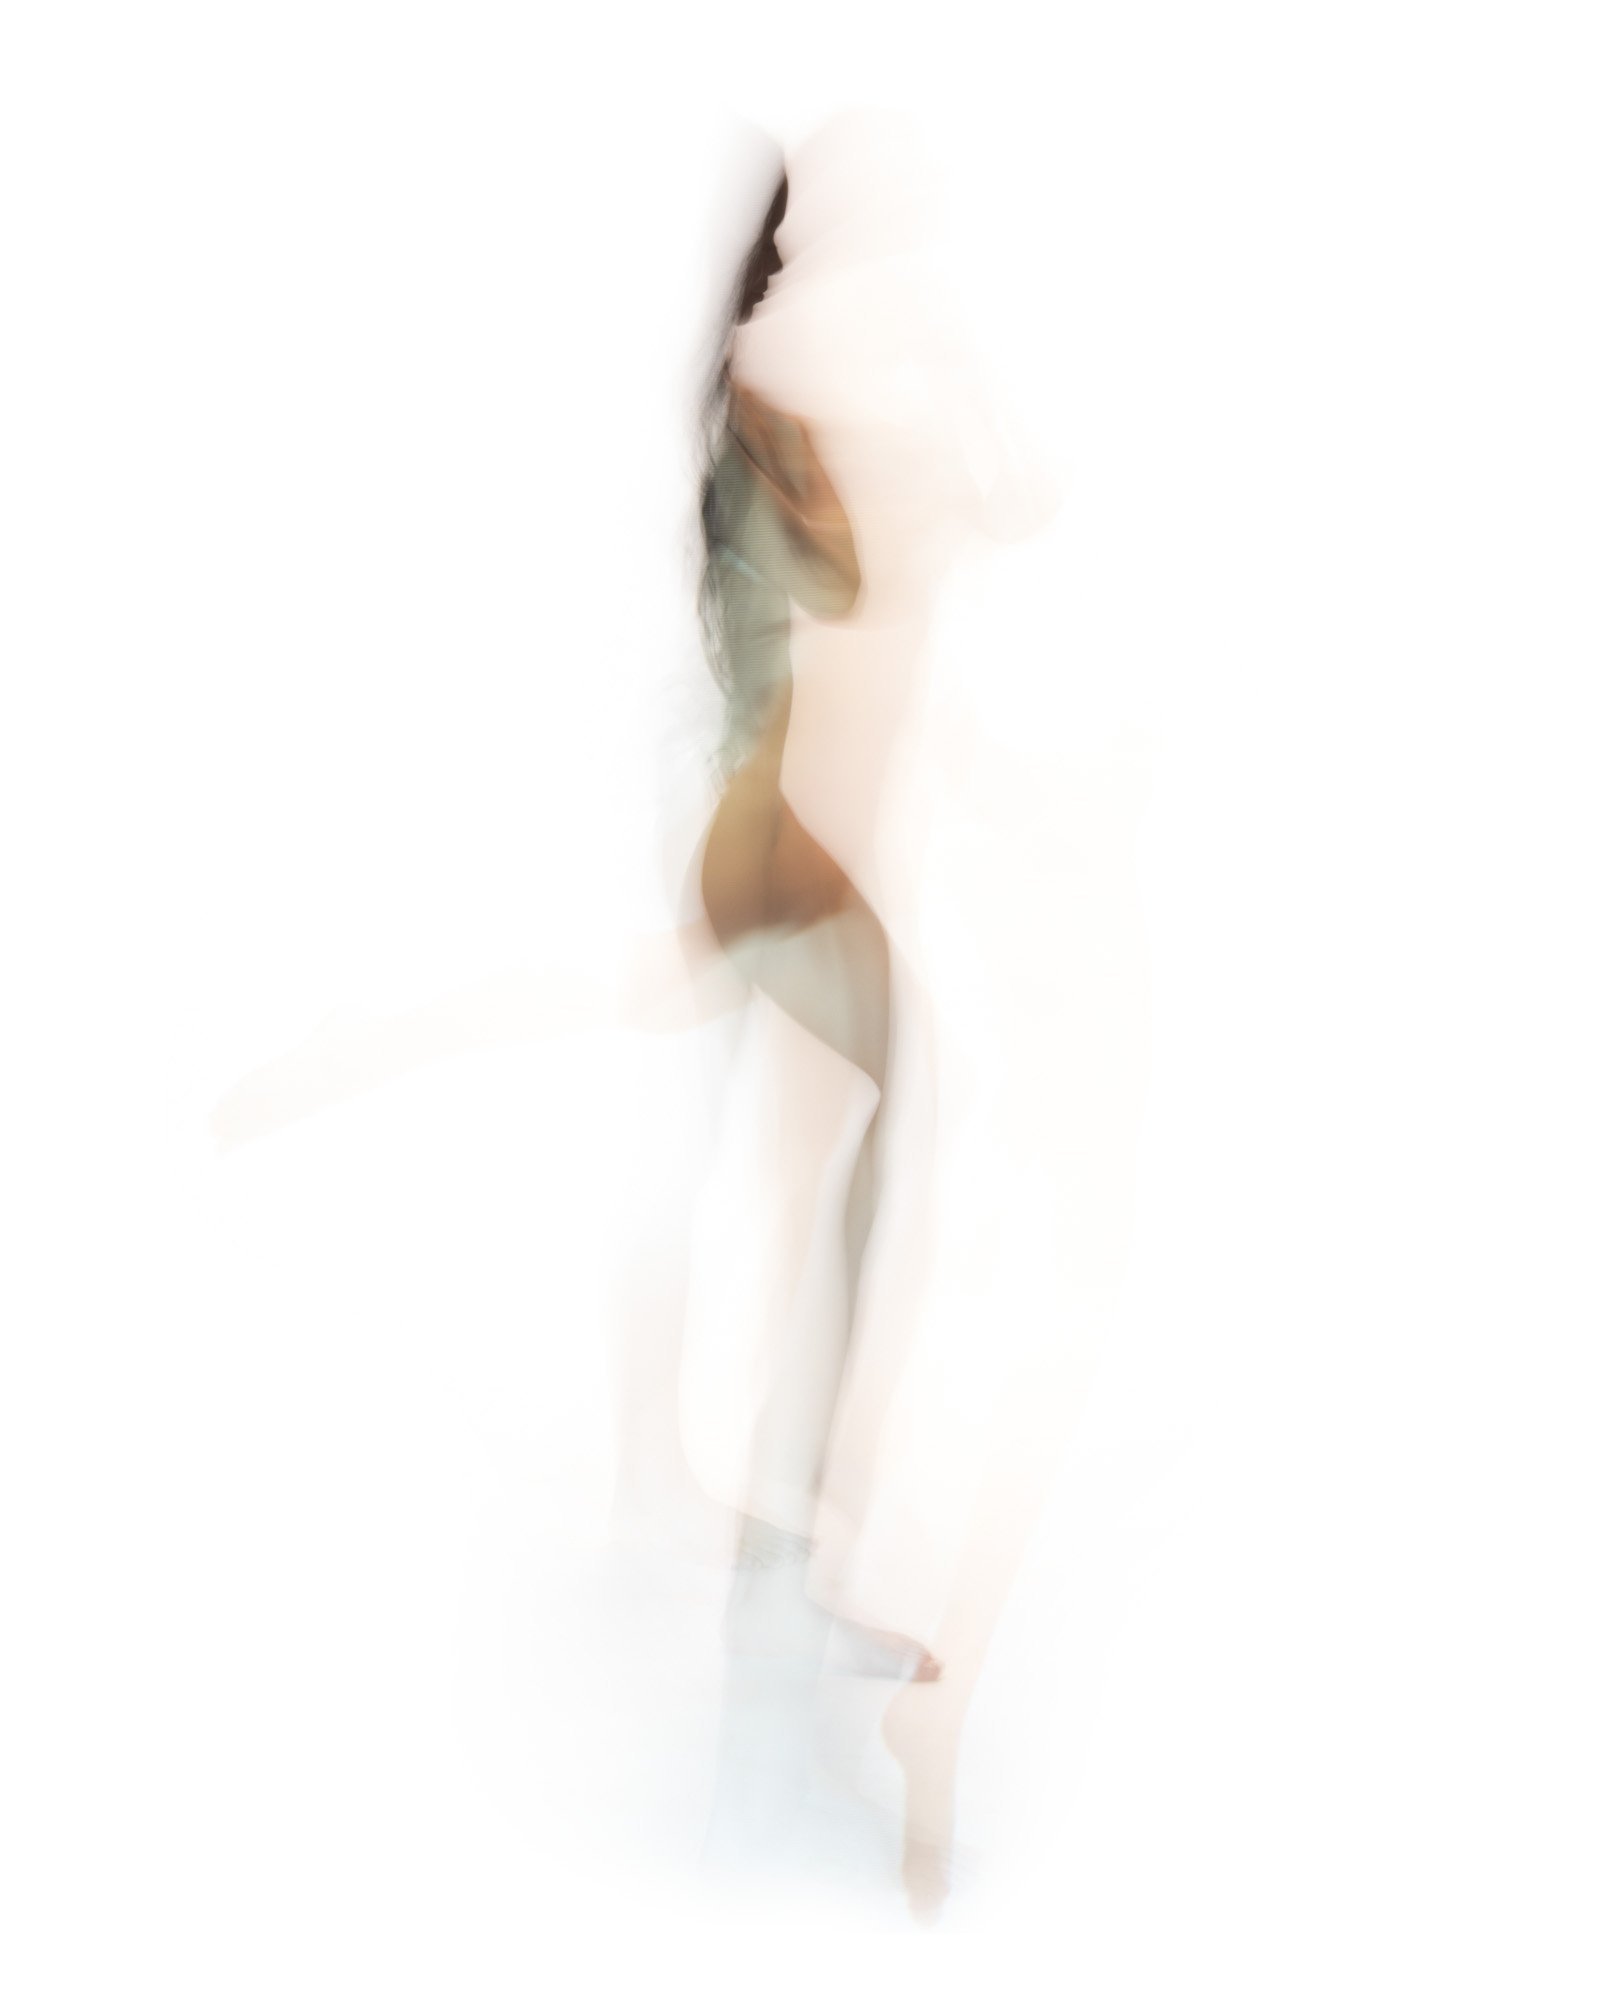 Projections17_Day26153-Edit.jpg